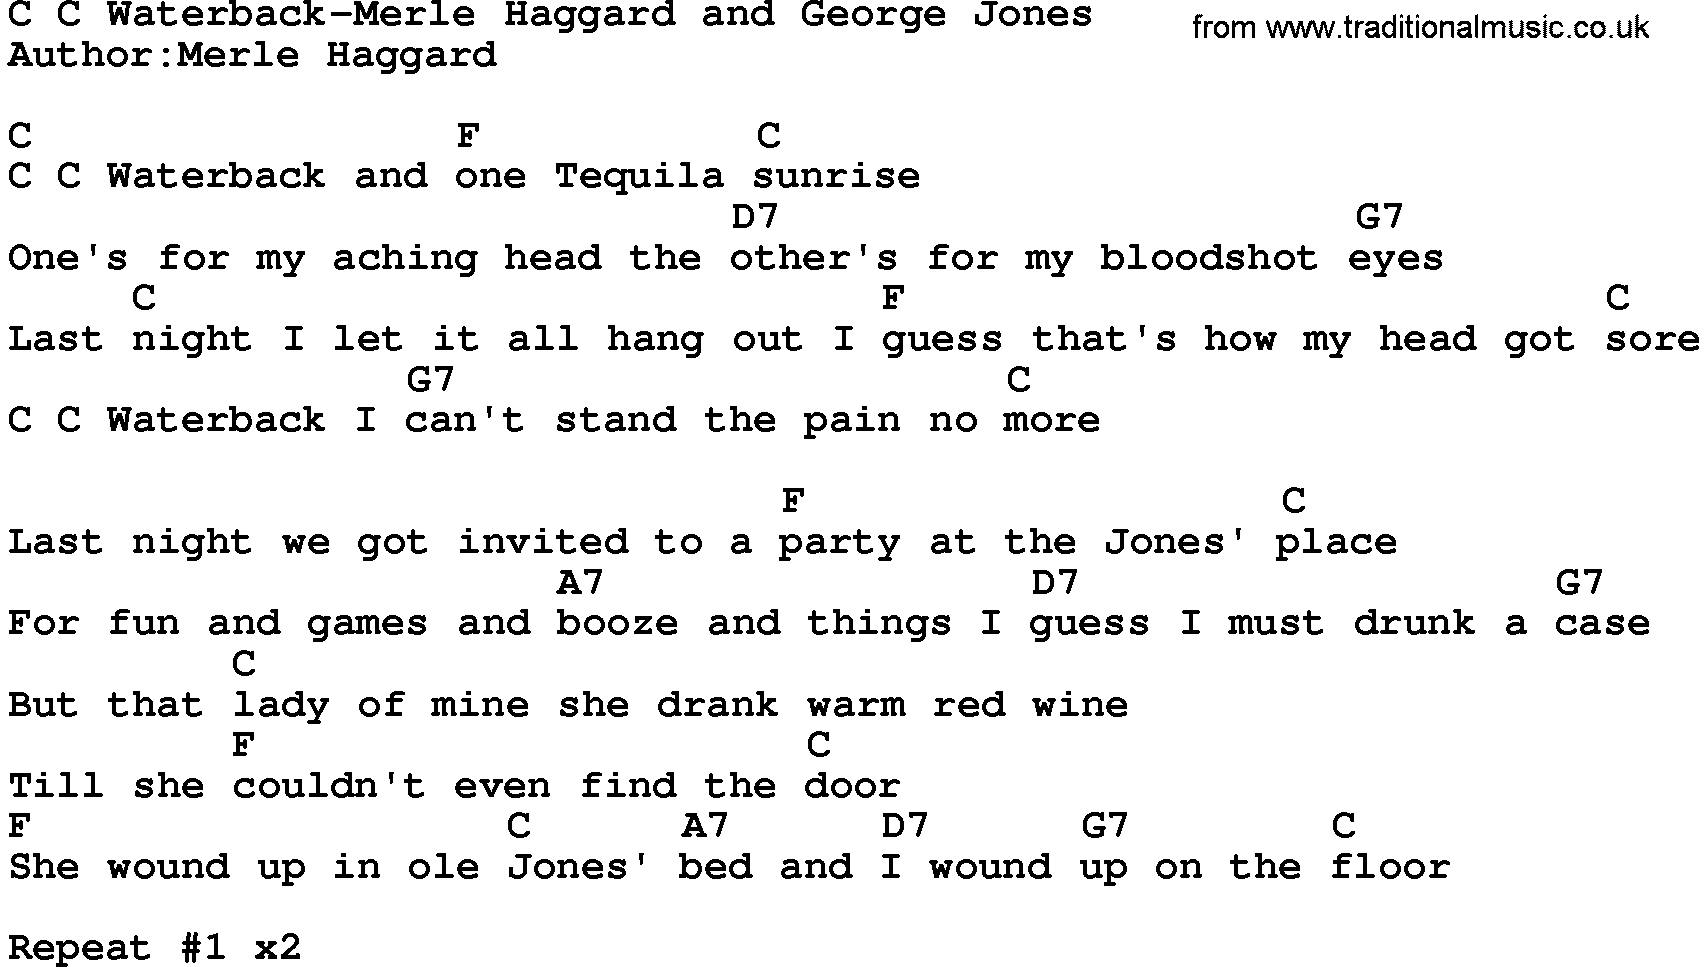 Country music song: C C Waterback-Merle Haggard And George Jones lyrics and chords